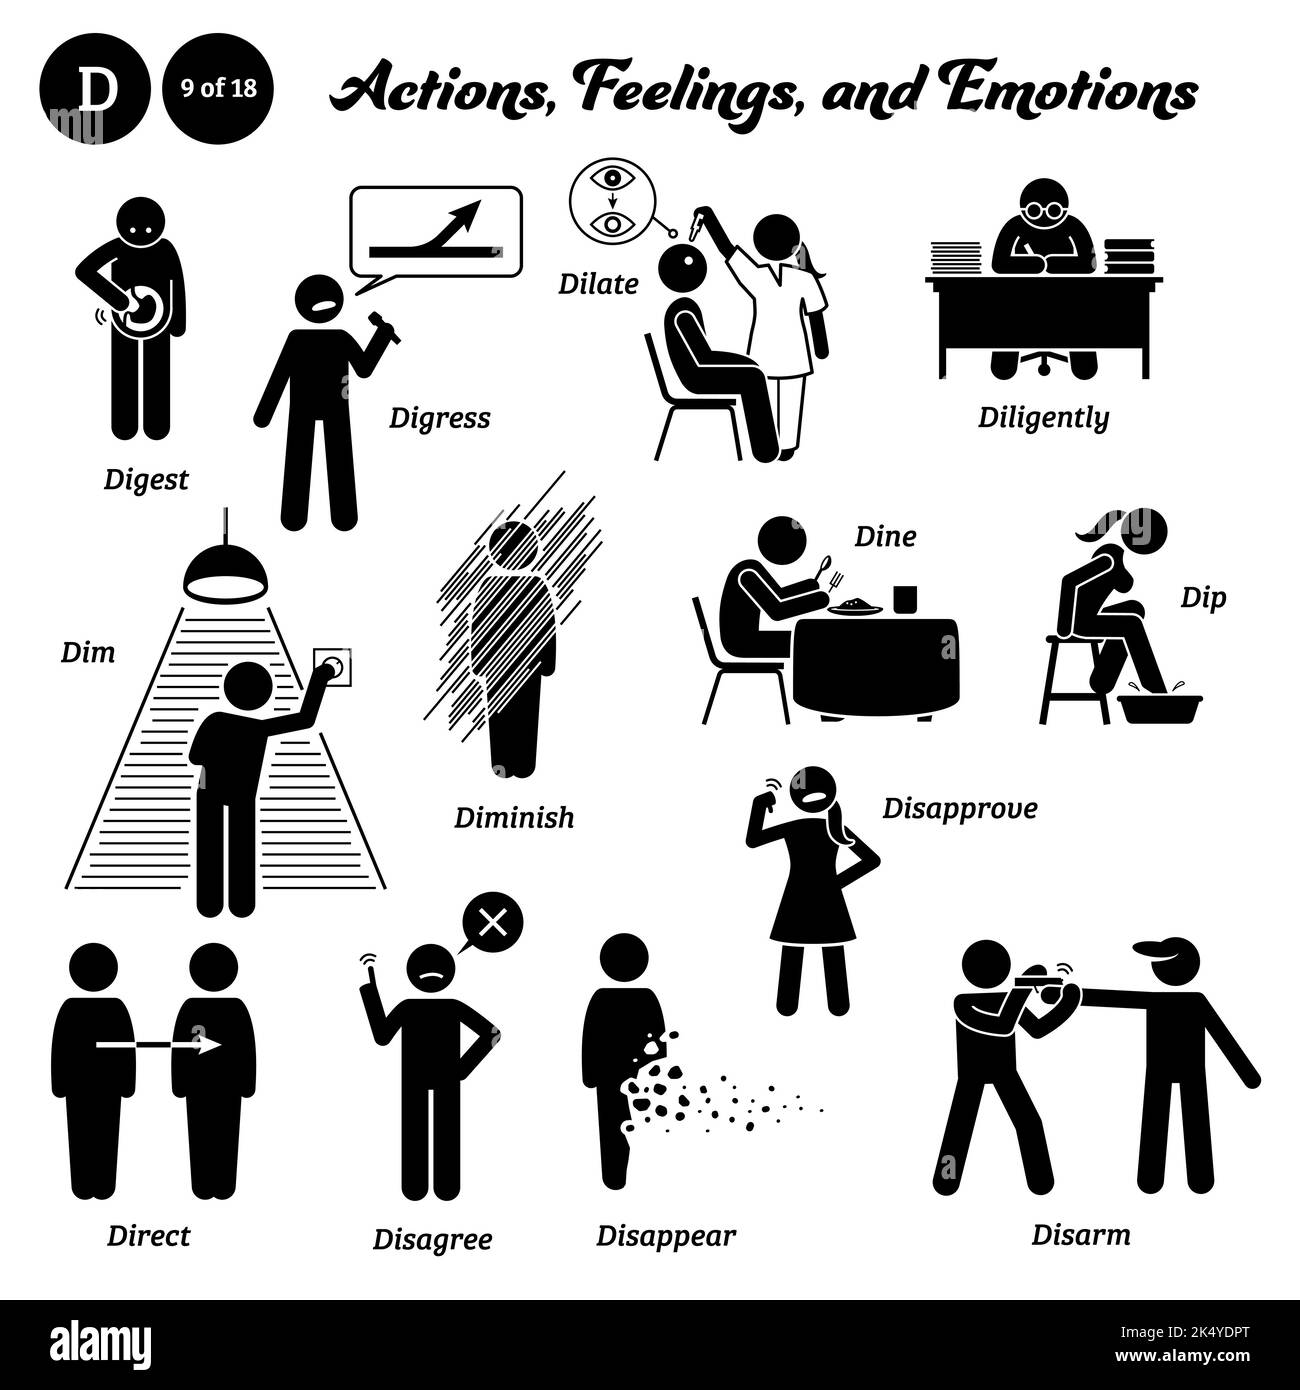 Stick figure human people man action, feelings, and emotions icons alphabet D. Digest, digress, dilate, diligently, dim, diminish, dine, dip, disappro Stock Vector